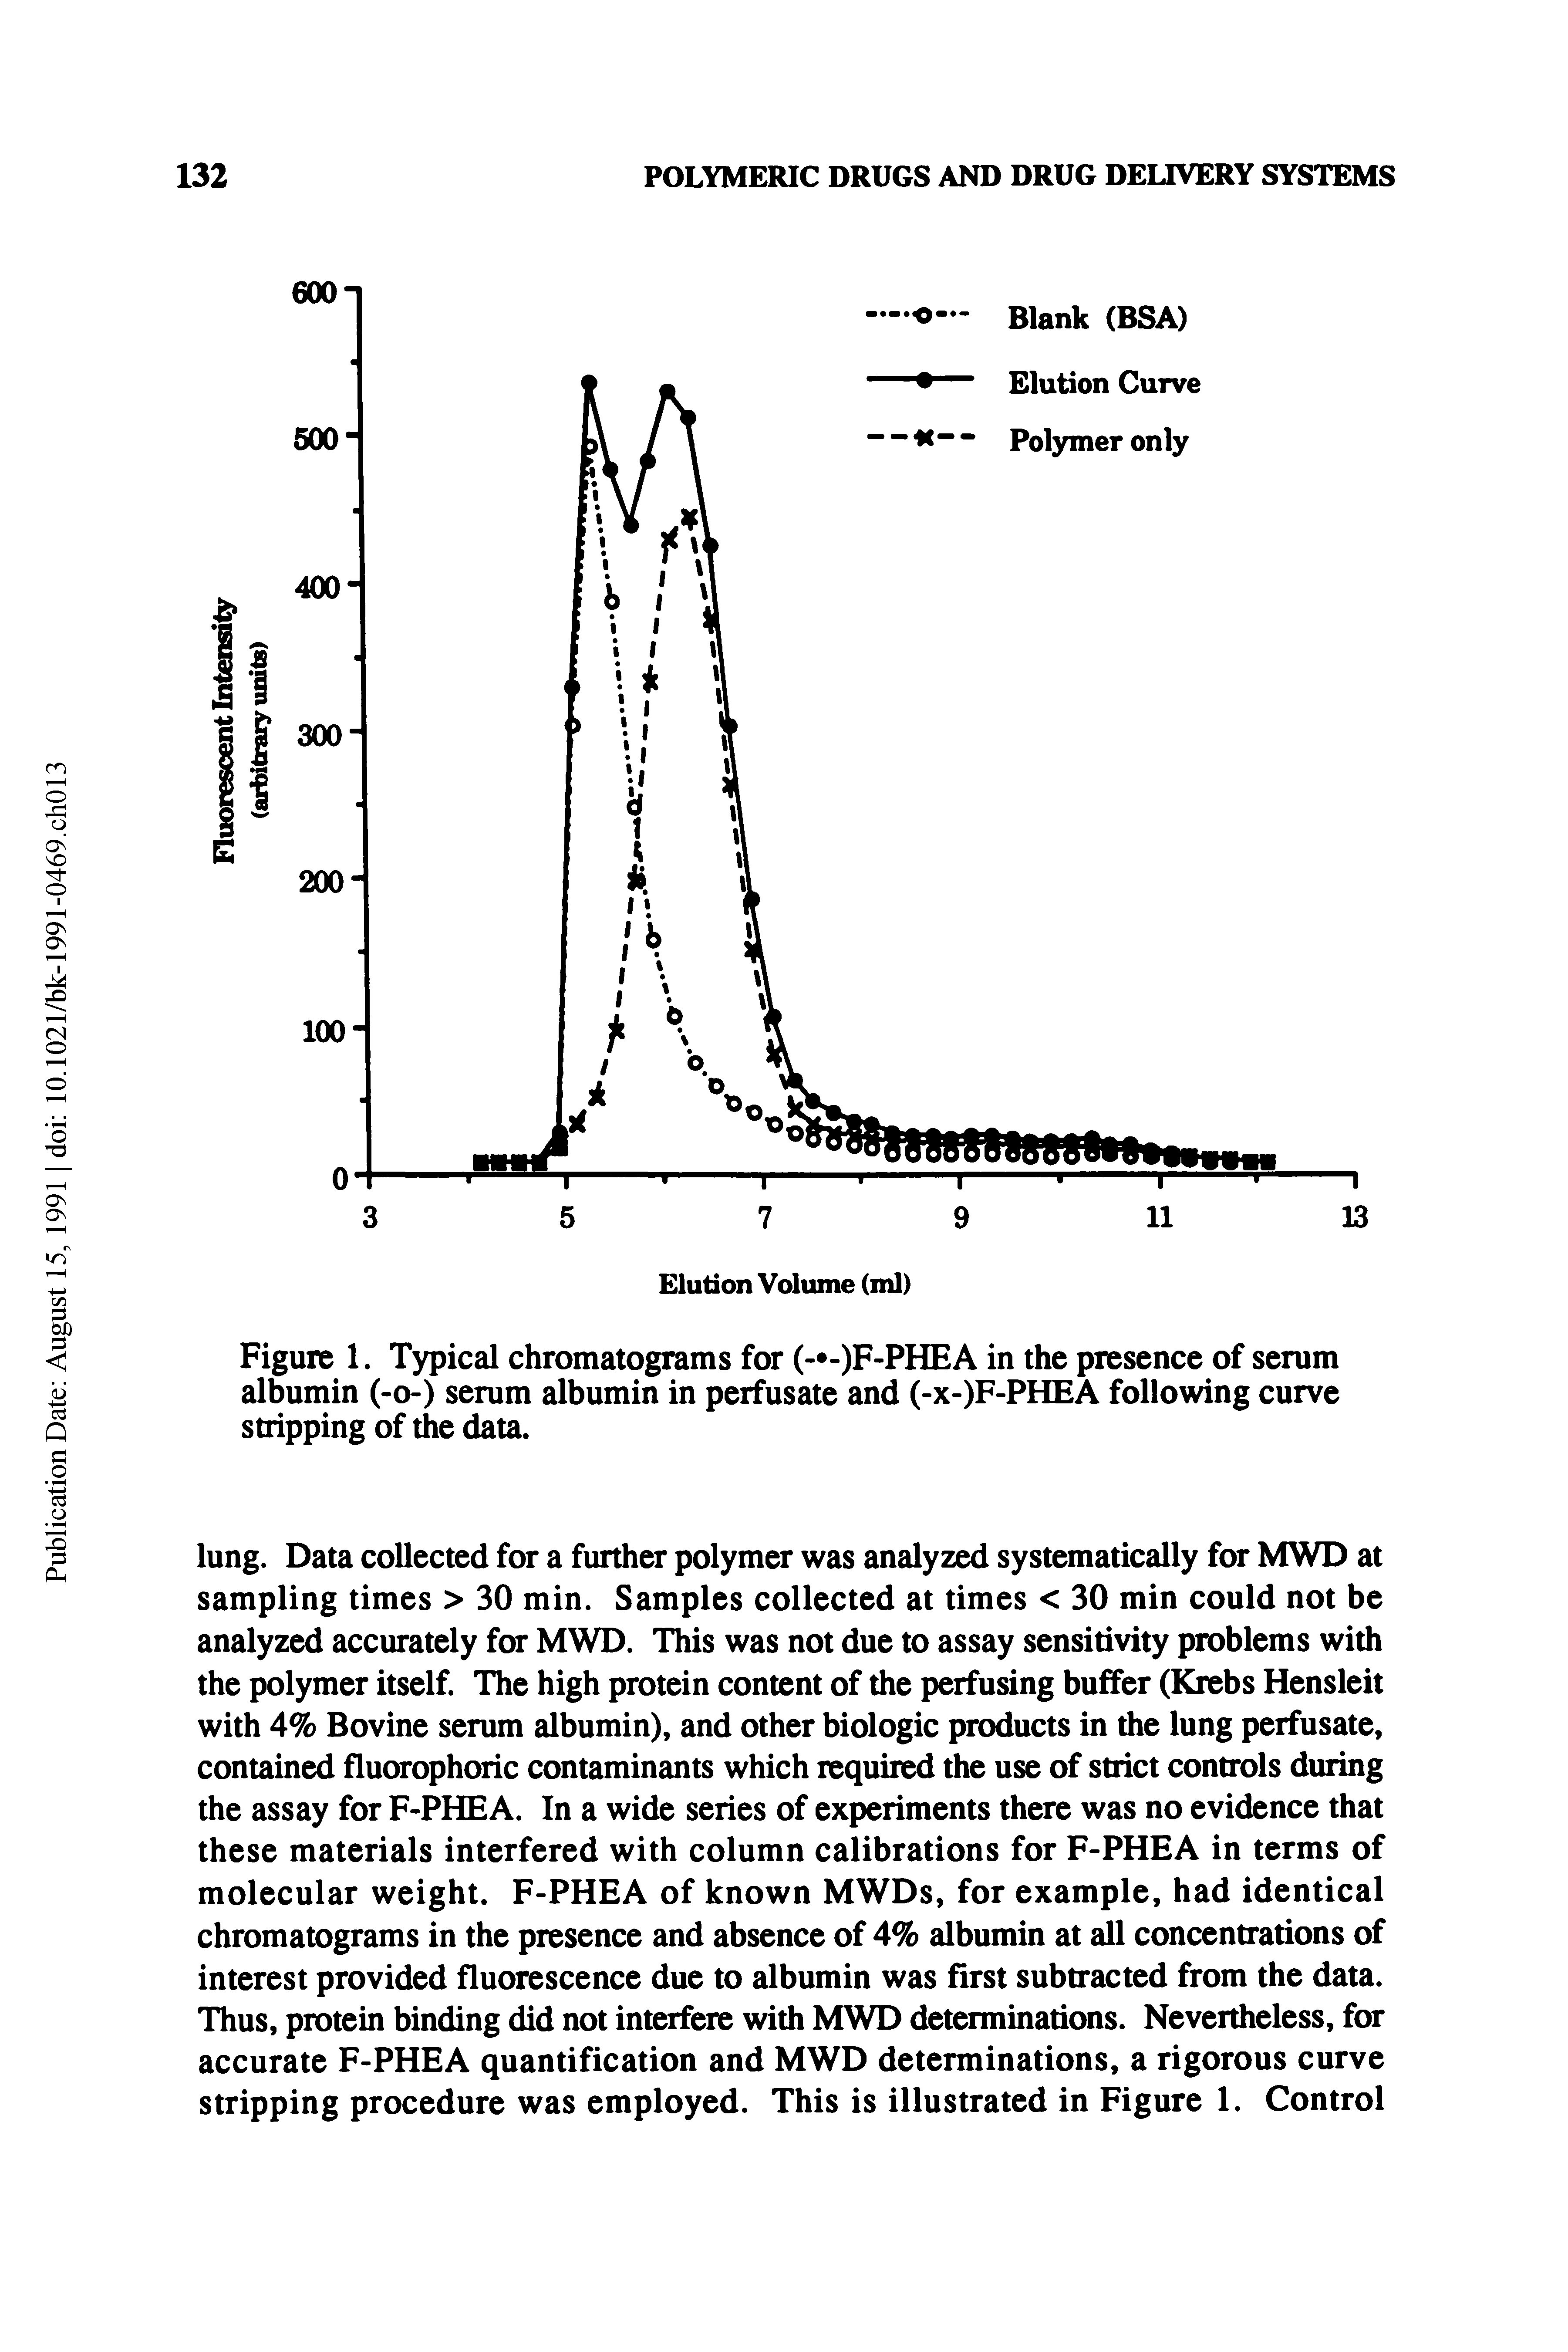 Figure 1. Typical chromatograms for (- -)F-PHEA in the presence of serum albumin (-o-) serum albumin in perfusate and (-x-)F-PHEA following curve stripping of the data.